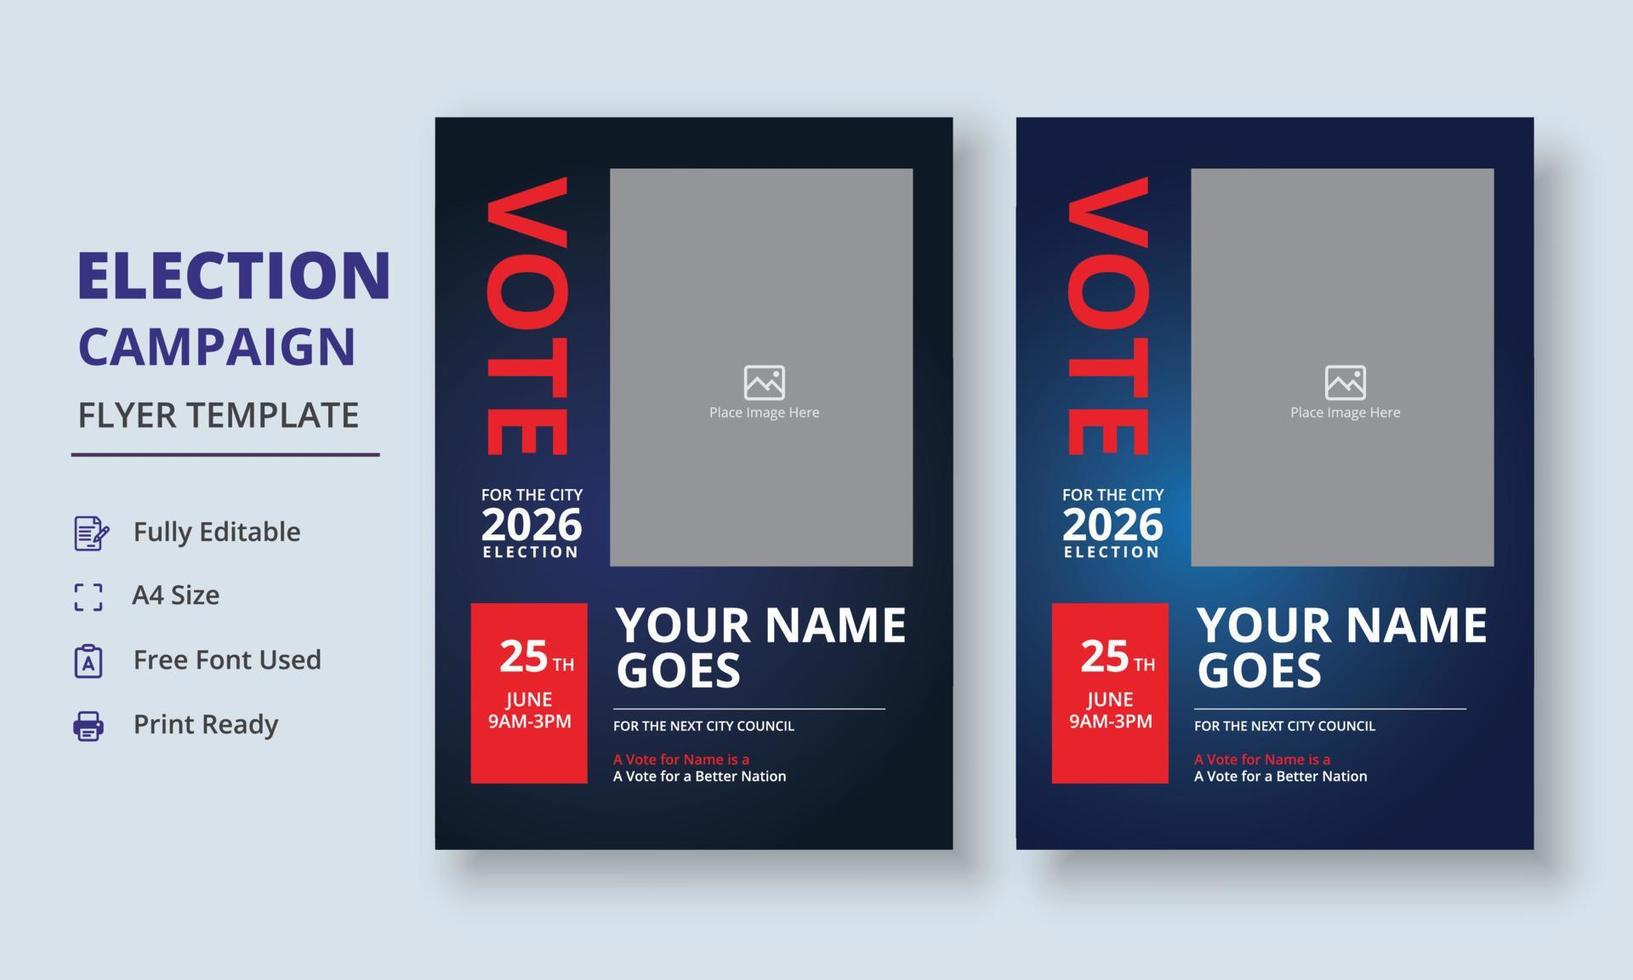 Election Campaign Flyer Template, Political Campaign Flyer Template, Vote Flyer Template, Political Election Poster vector